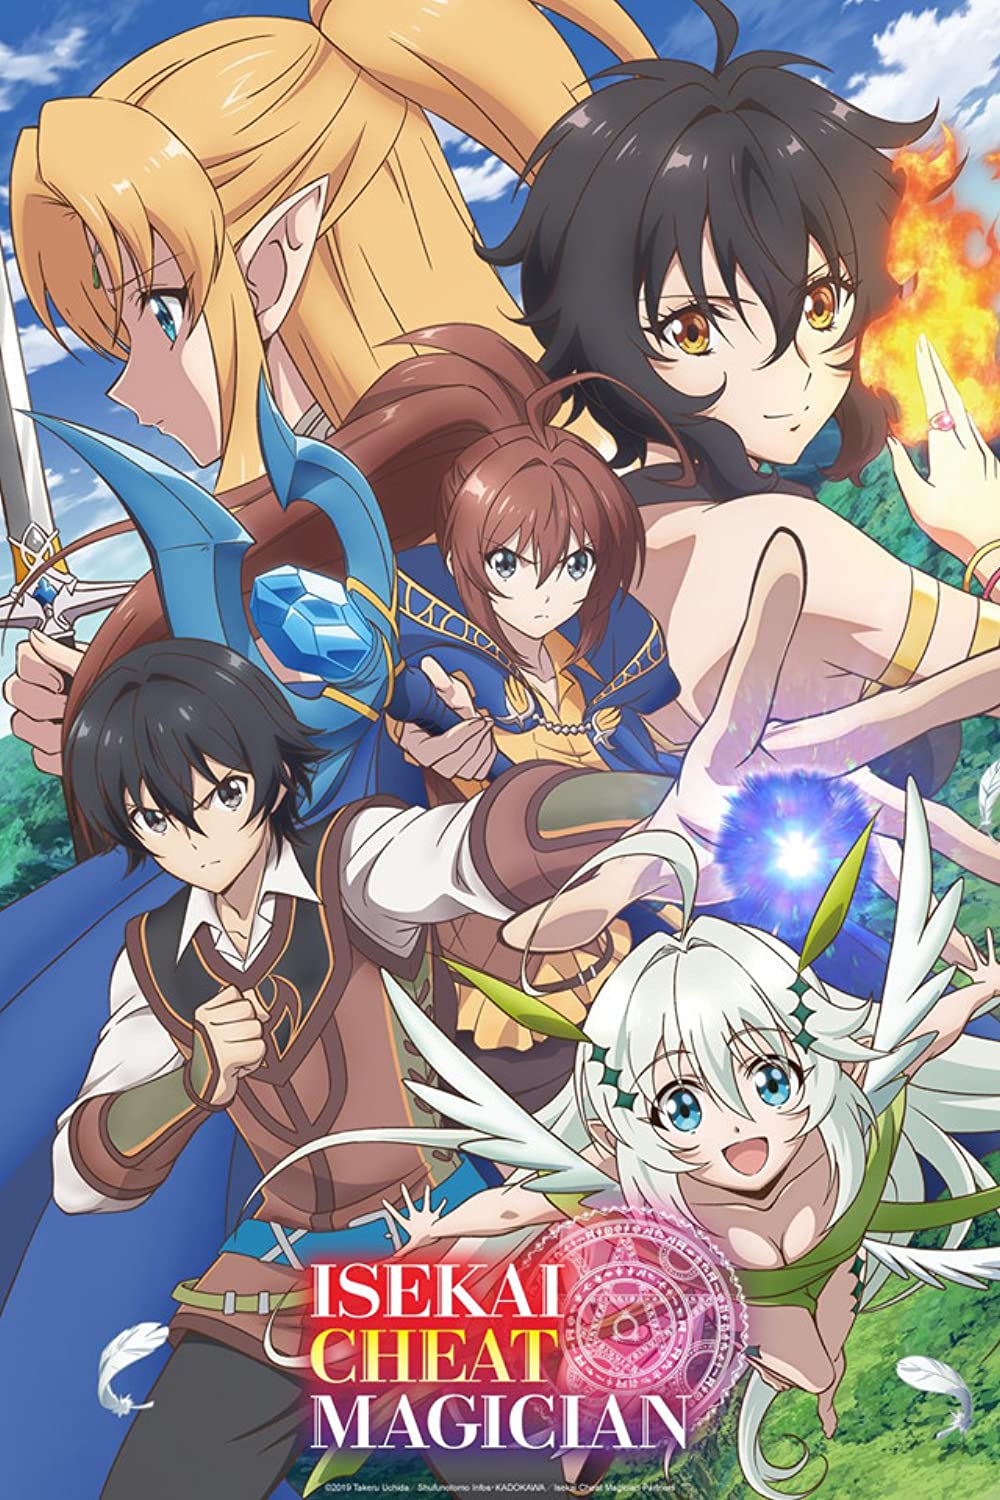 20 Isekai Anime Series To Watch So That You Can Travel To Other Worlds